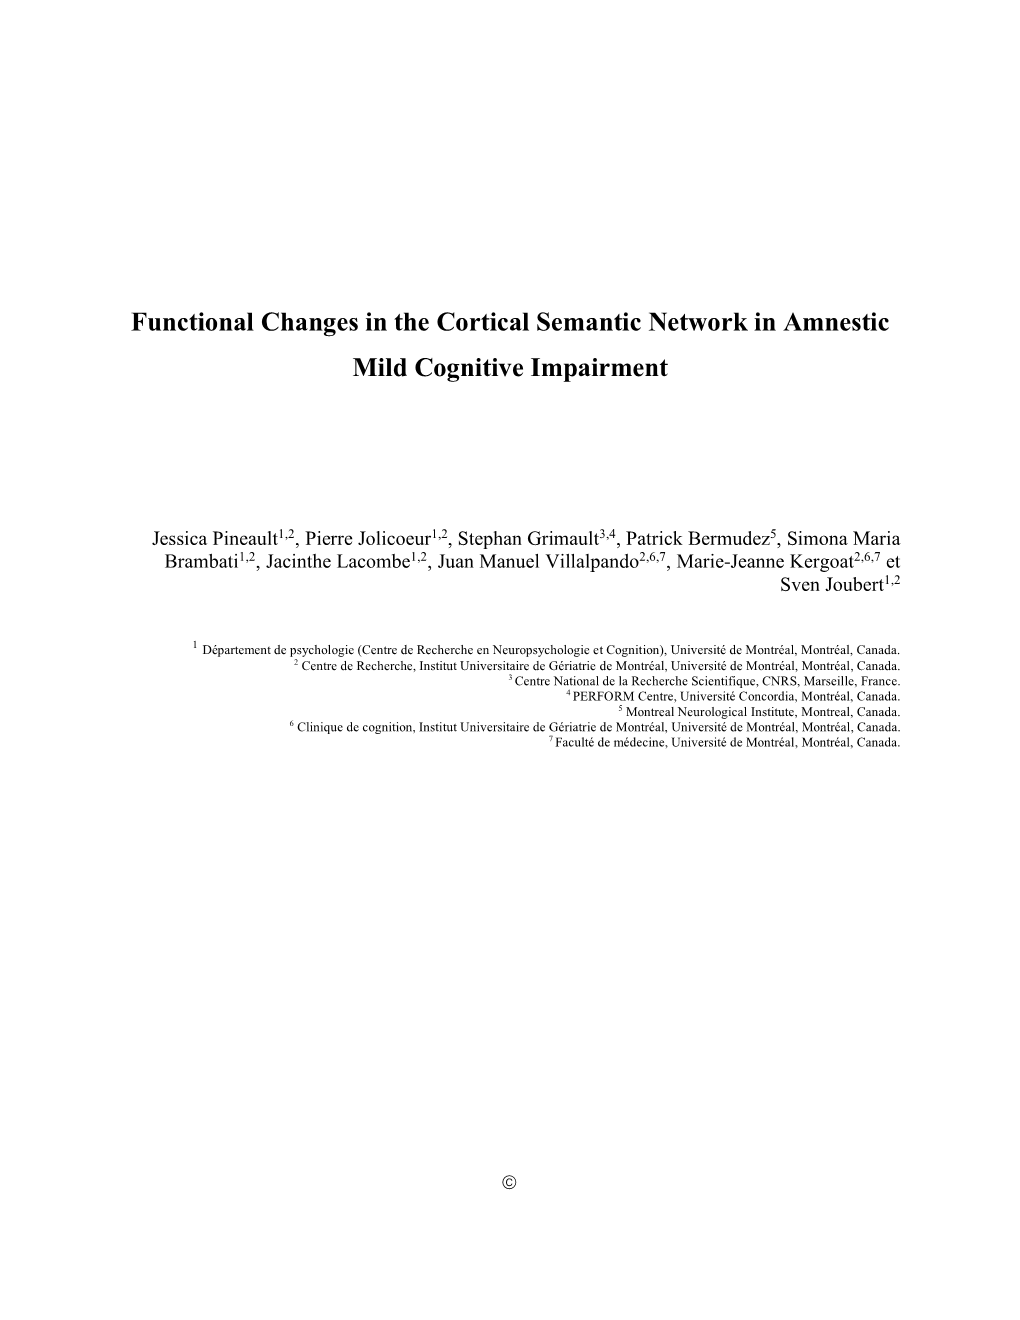 Functional Changes in the Cortical Semantic Network in Amnestic Mild Cognitive Impairment